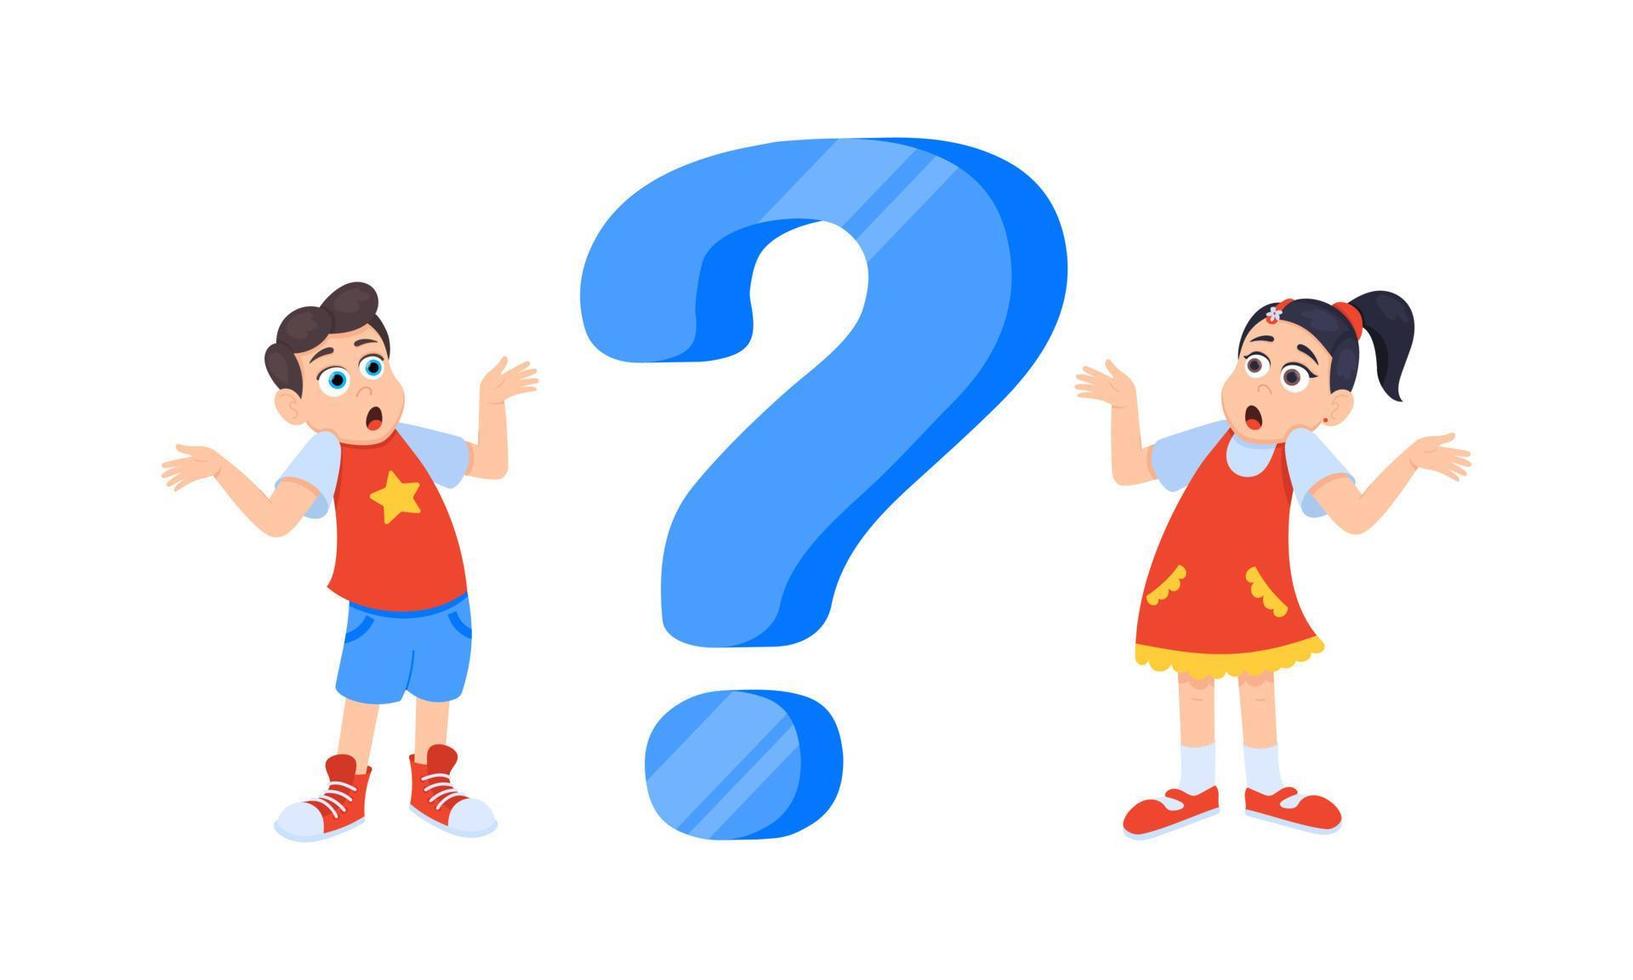 Little doubt girl and boy kids asking question flat style design vector illustration.